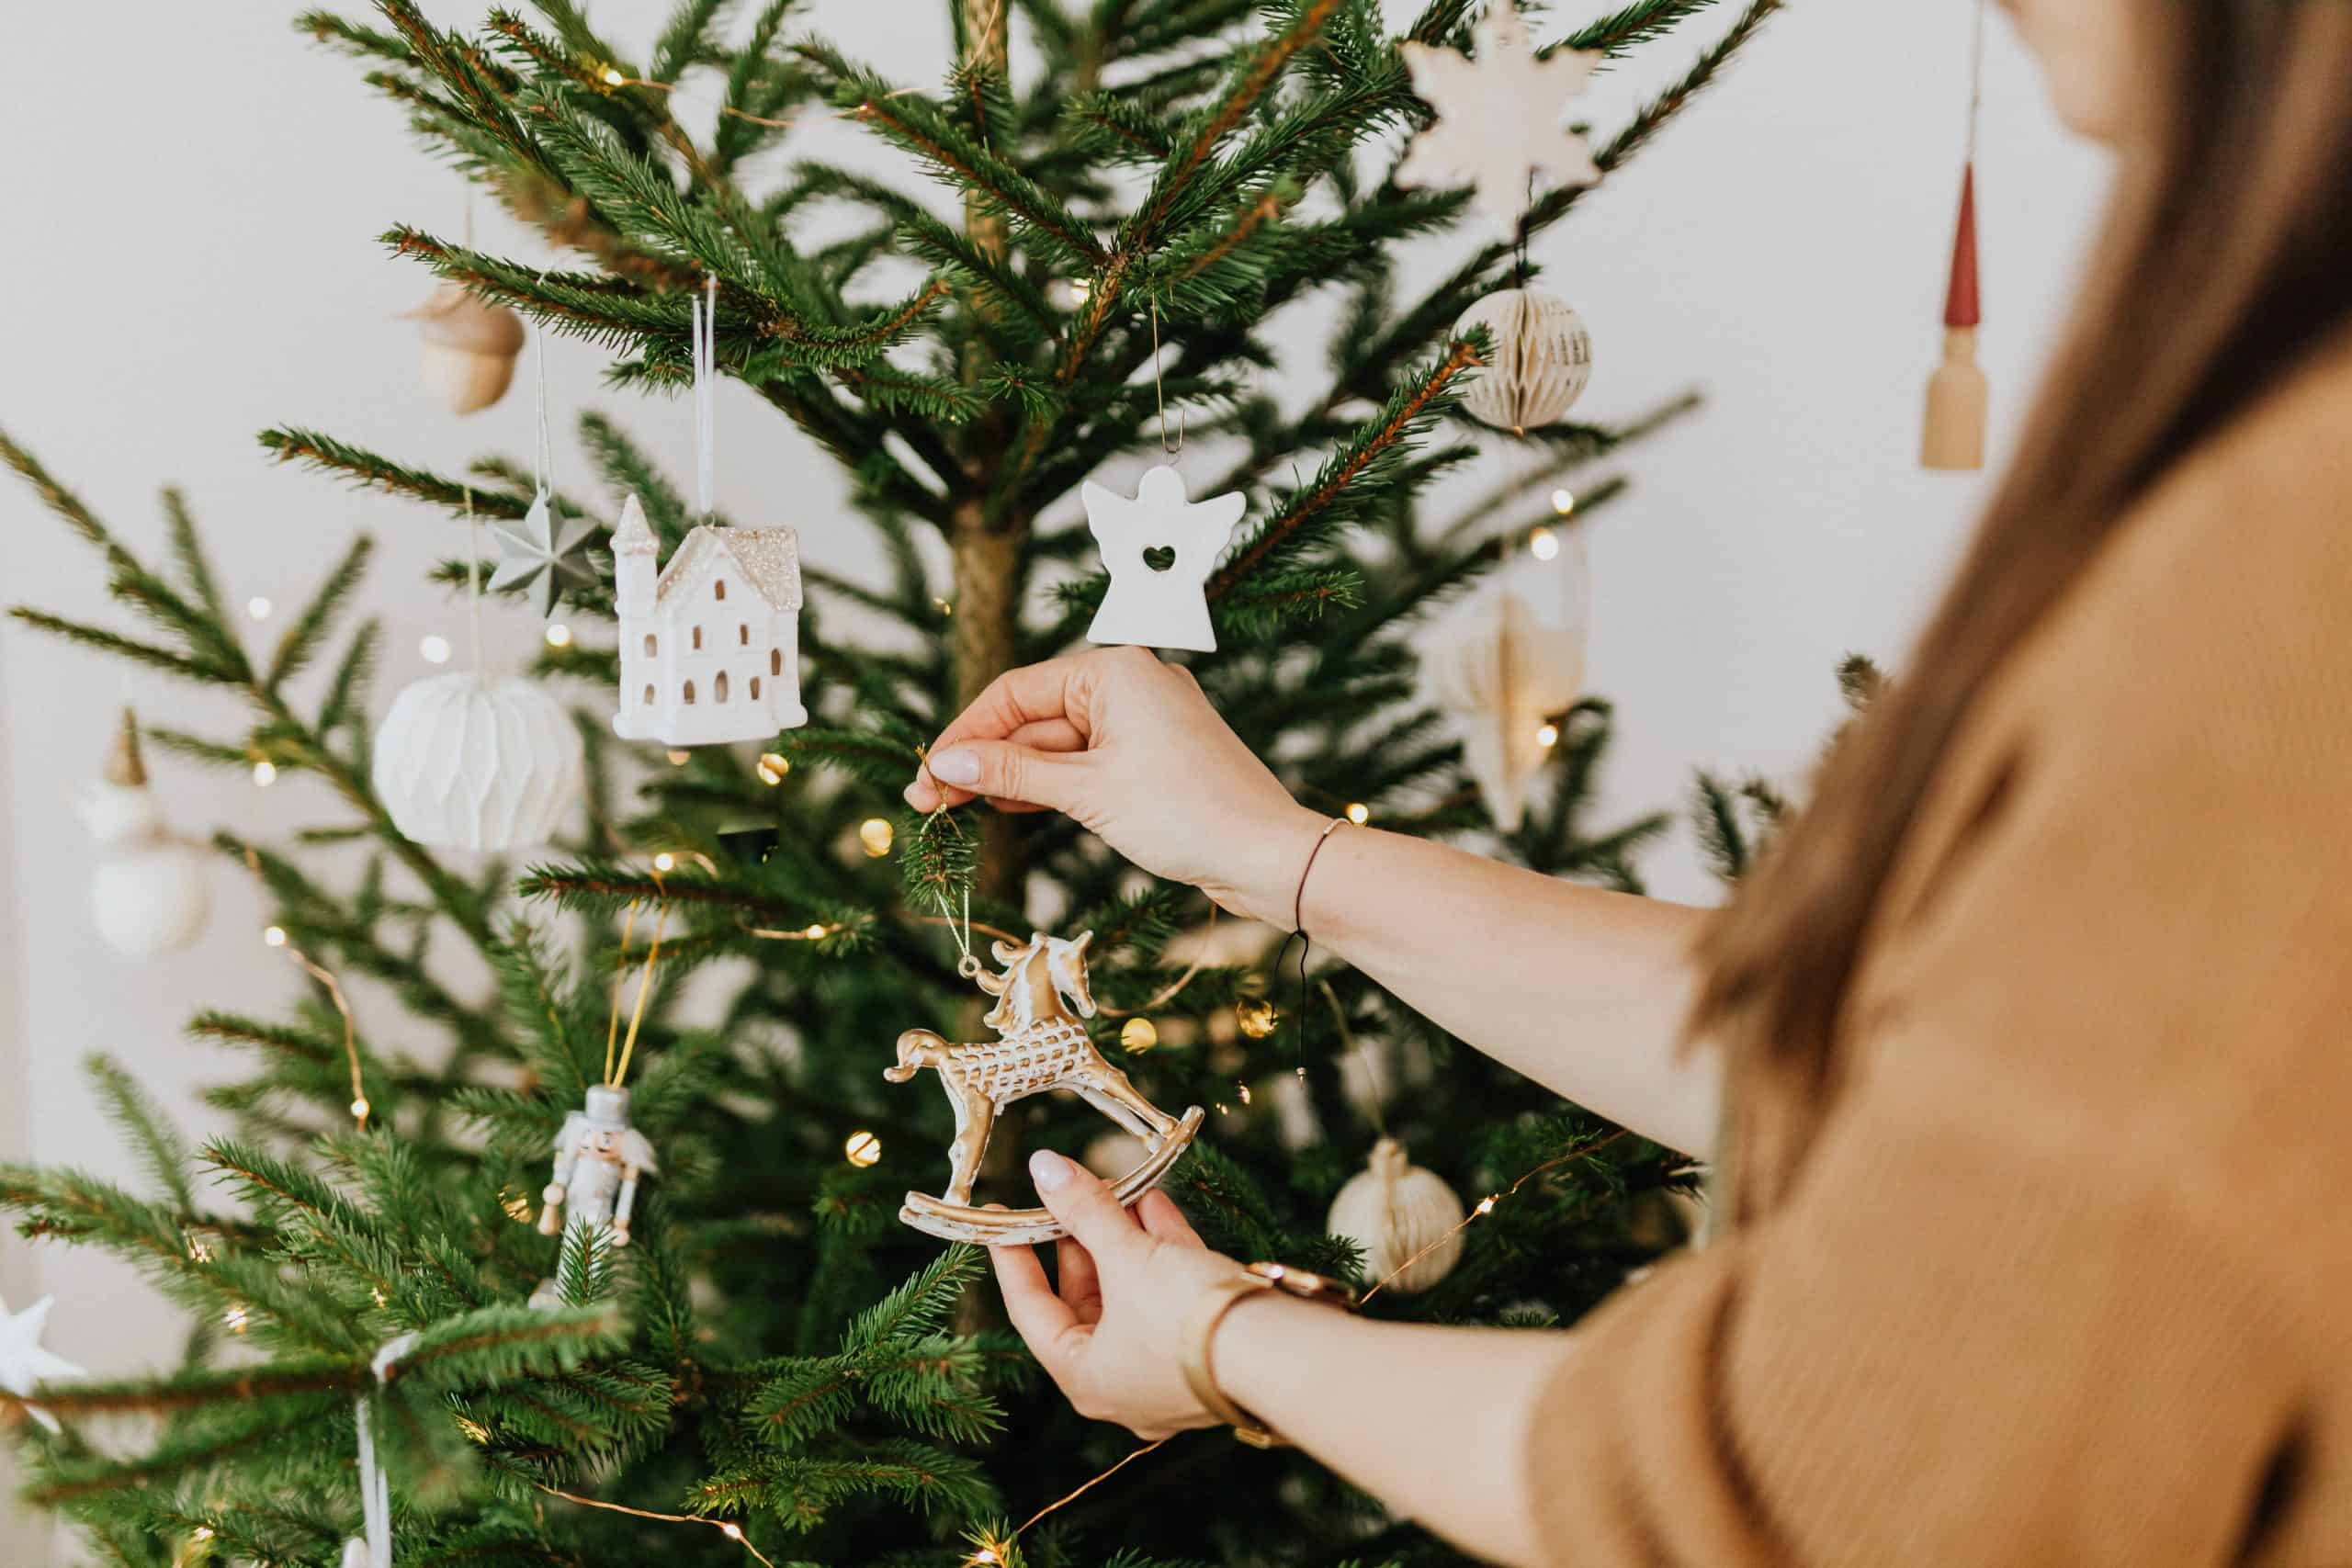 Christmas decorations you can’t miss in your home